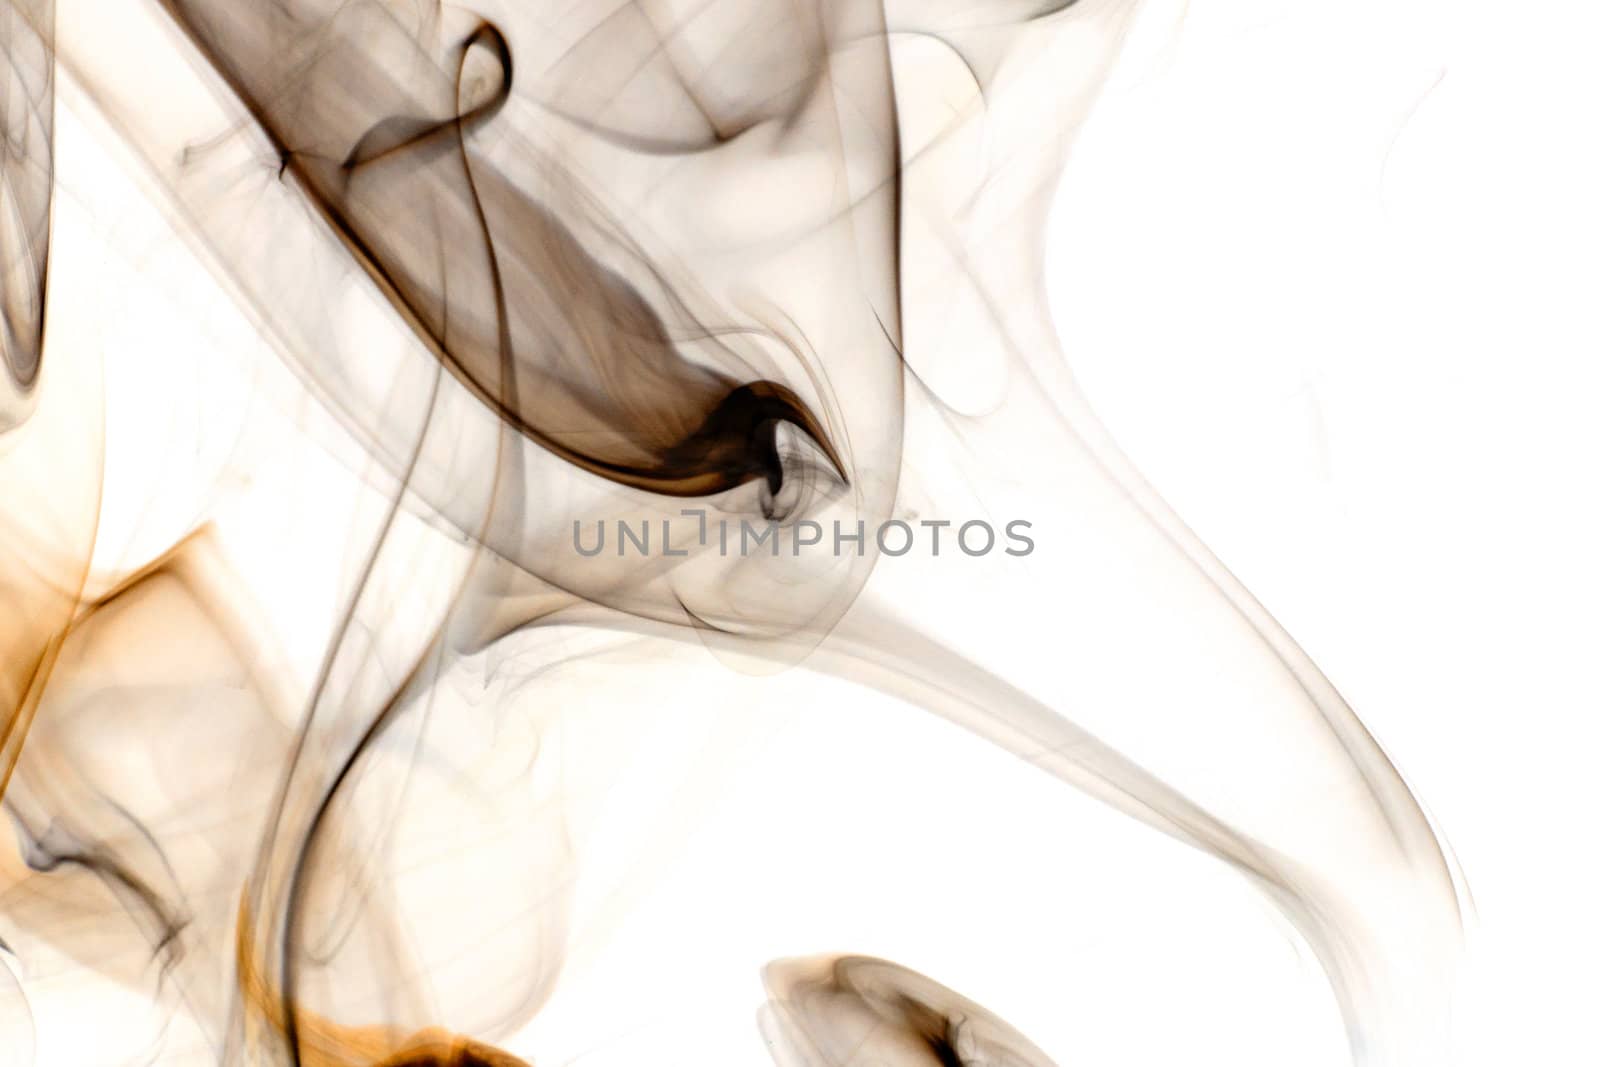 An abstract image of dark colored smoke set against a white background.